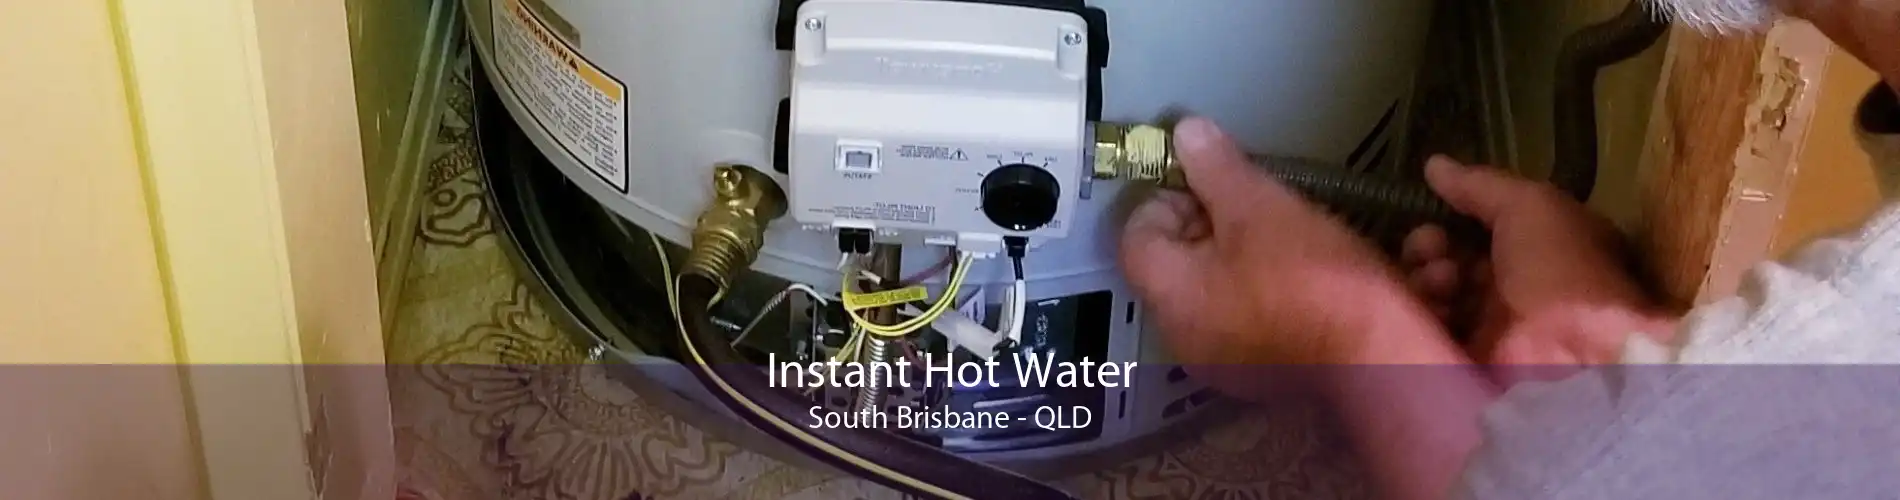 Instant Hot Water South Brisbane - QLD